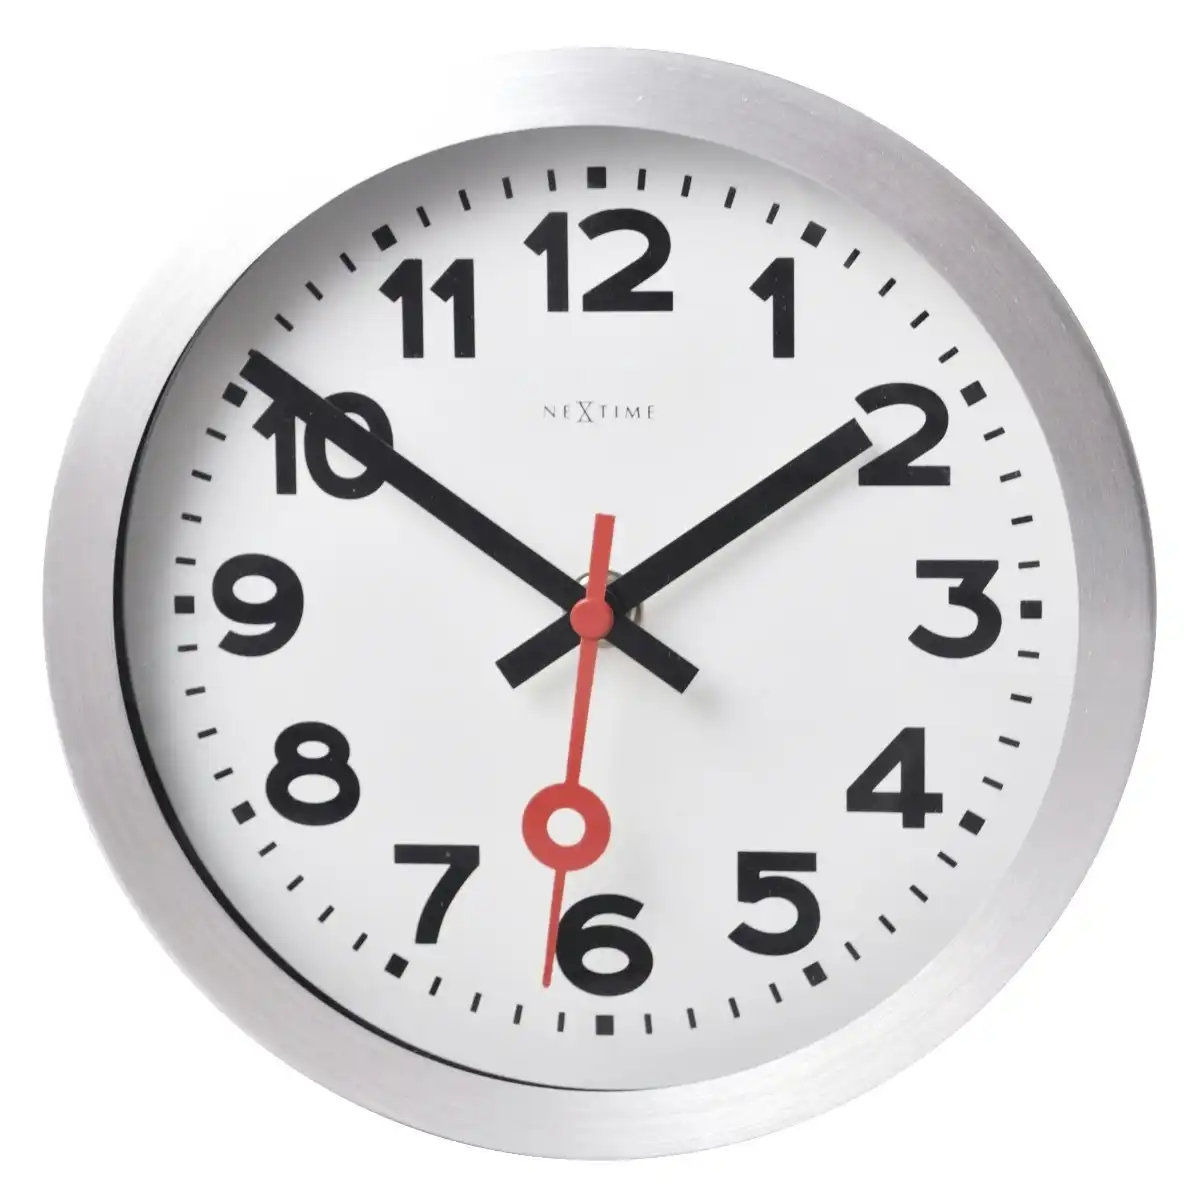 NeXtime 35cm Station Numerical Silent Analogue Round Wall Clock Home Decor White